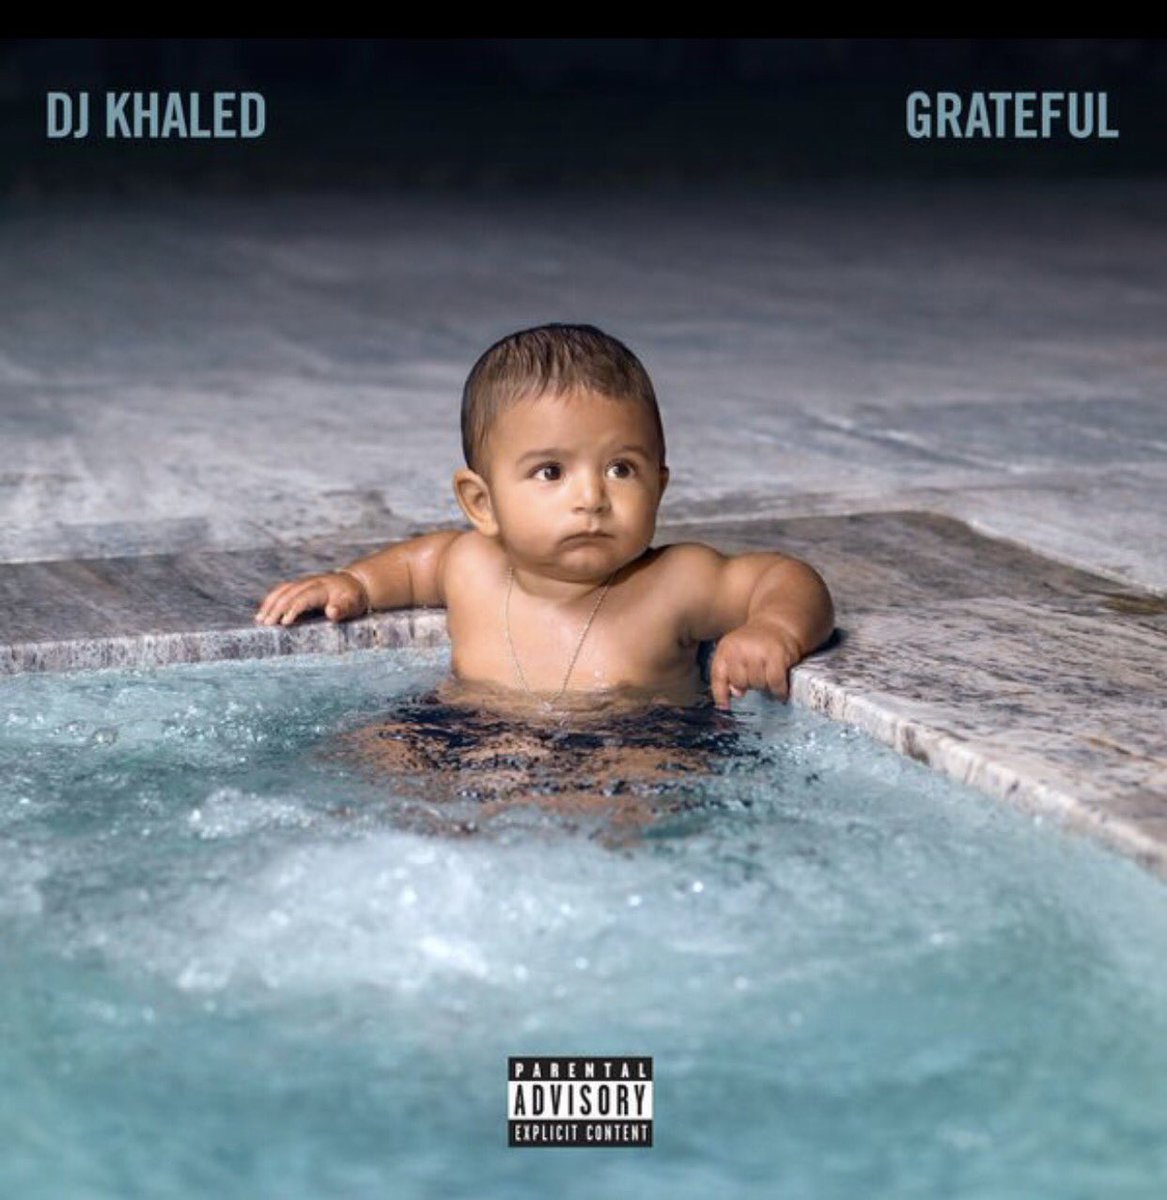 This DJ KHALED ALBUM IS A MONSTER #wethebestradio #BEENKNOWINGKHALEDSINCE92 https://t.co/rSHPfUUlAA